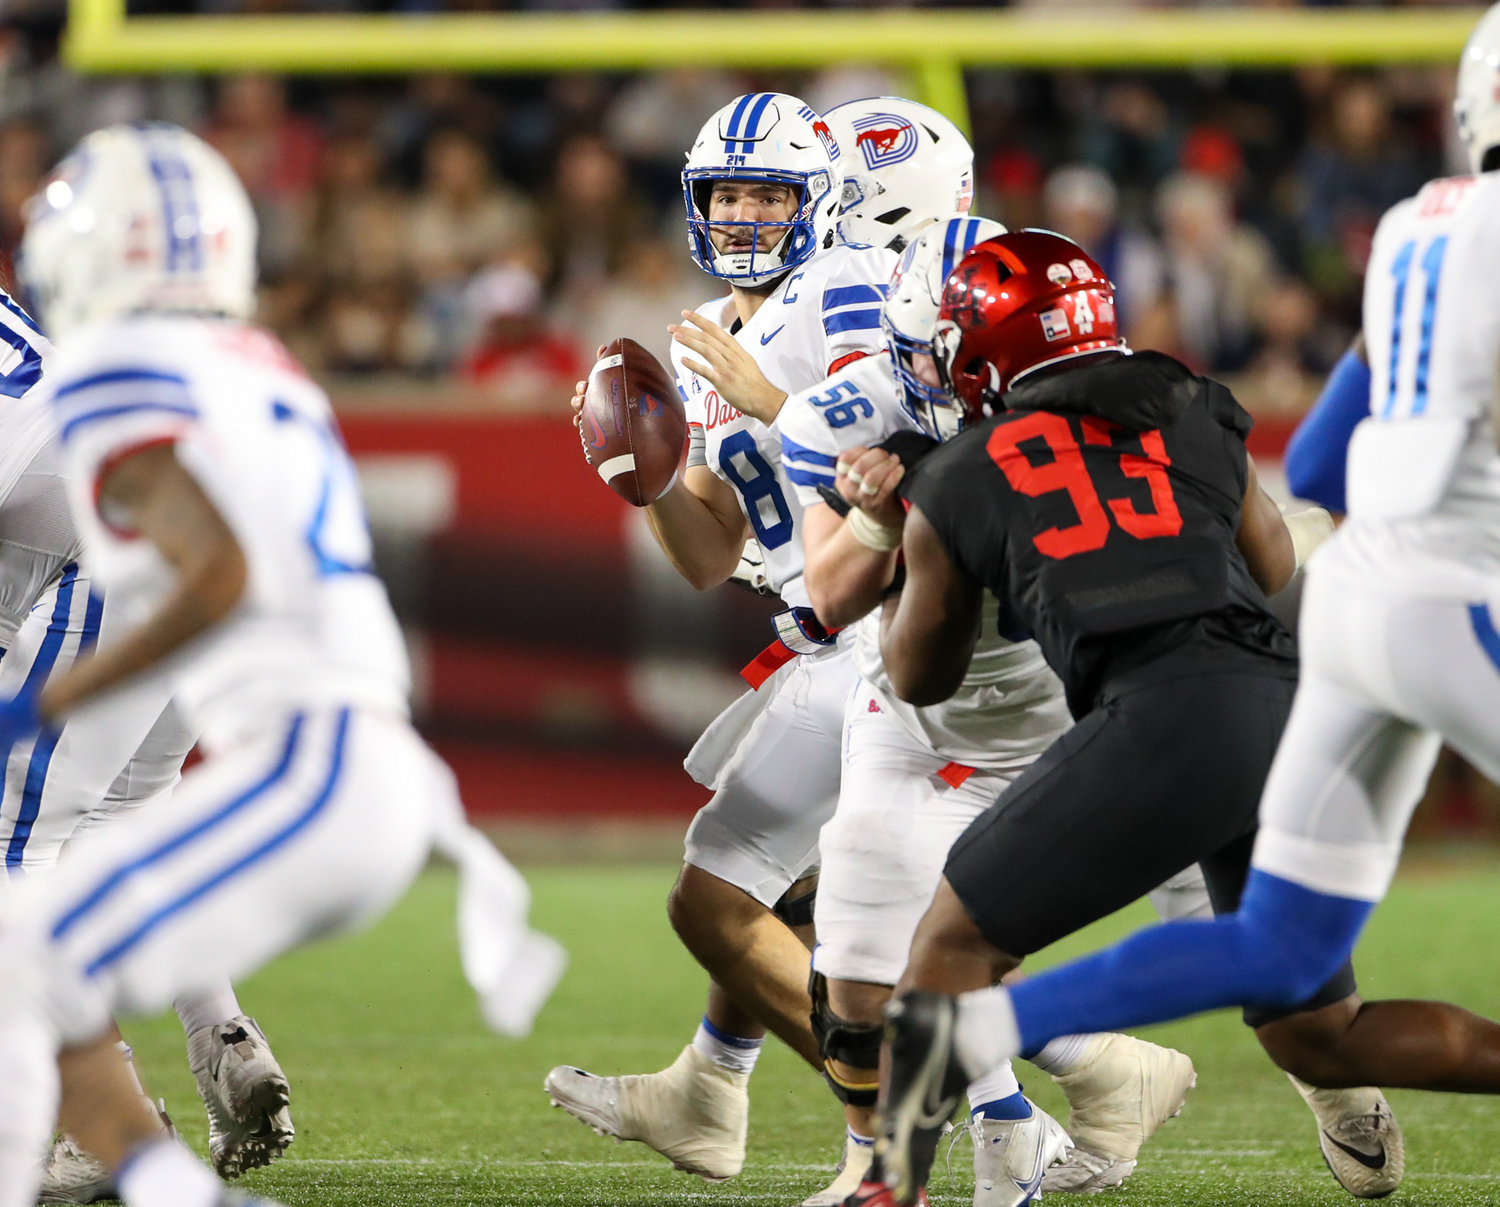 SMU Mustangs quarterback Tanner Mordecai (8) looks to pass during an NCAA football game between Houston and SMU on October 30, 2021 in Houston, Texas.